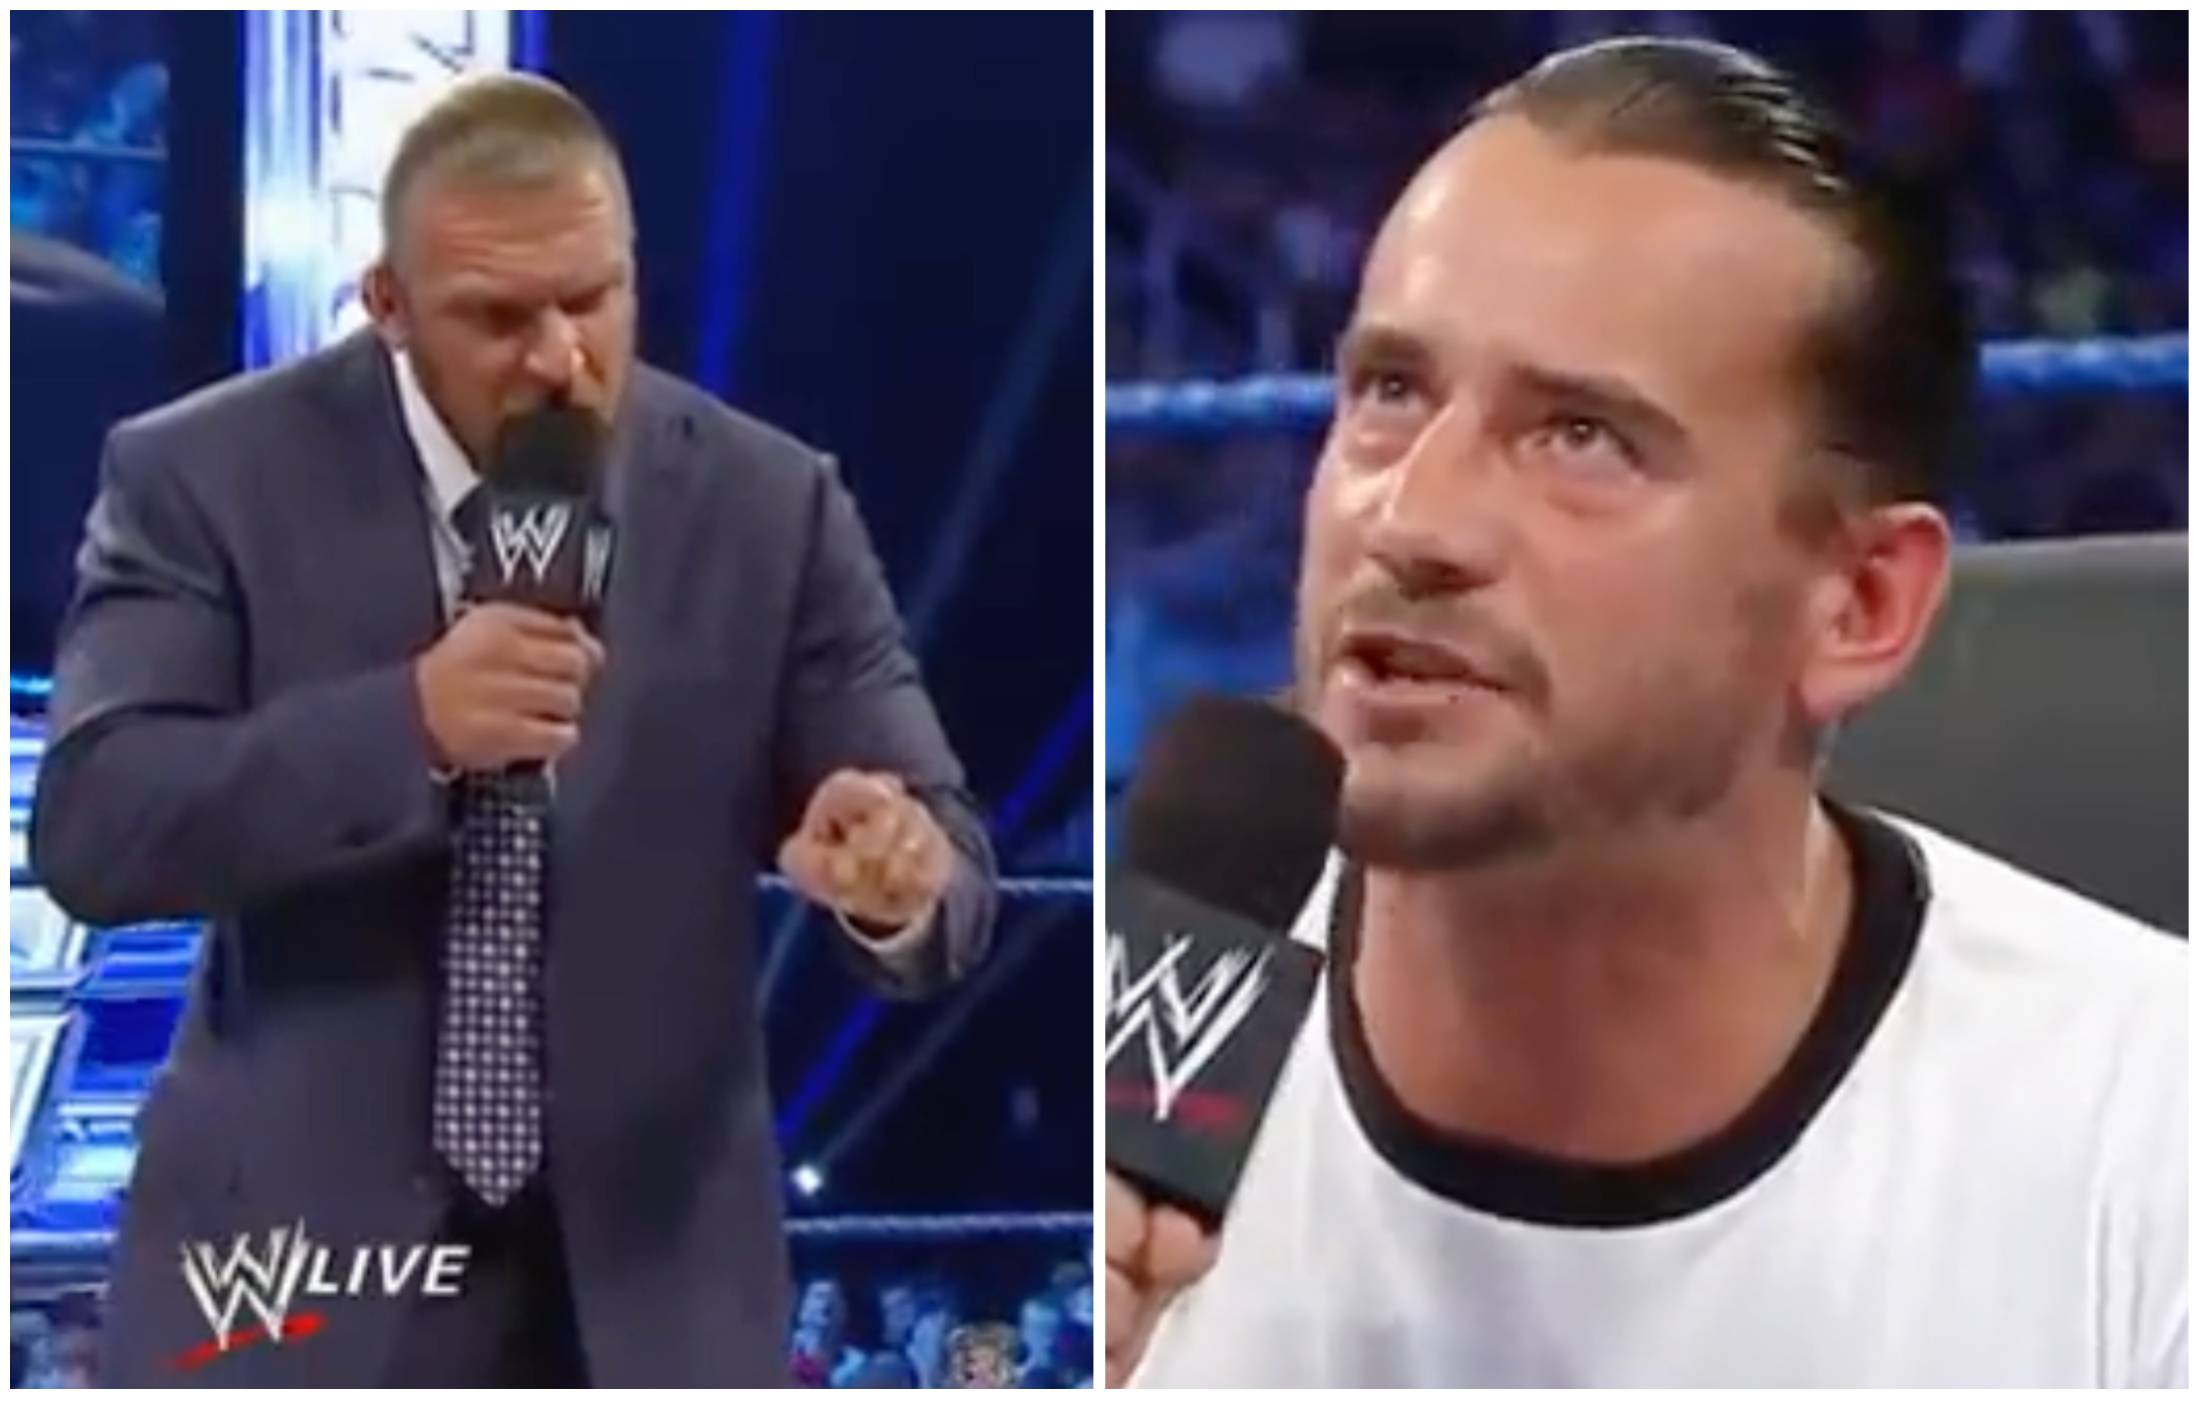 Triple H was right with his damning assessment of CM Punk